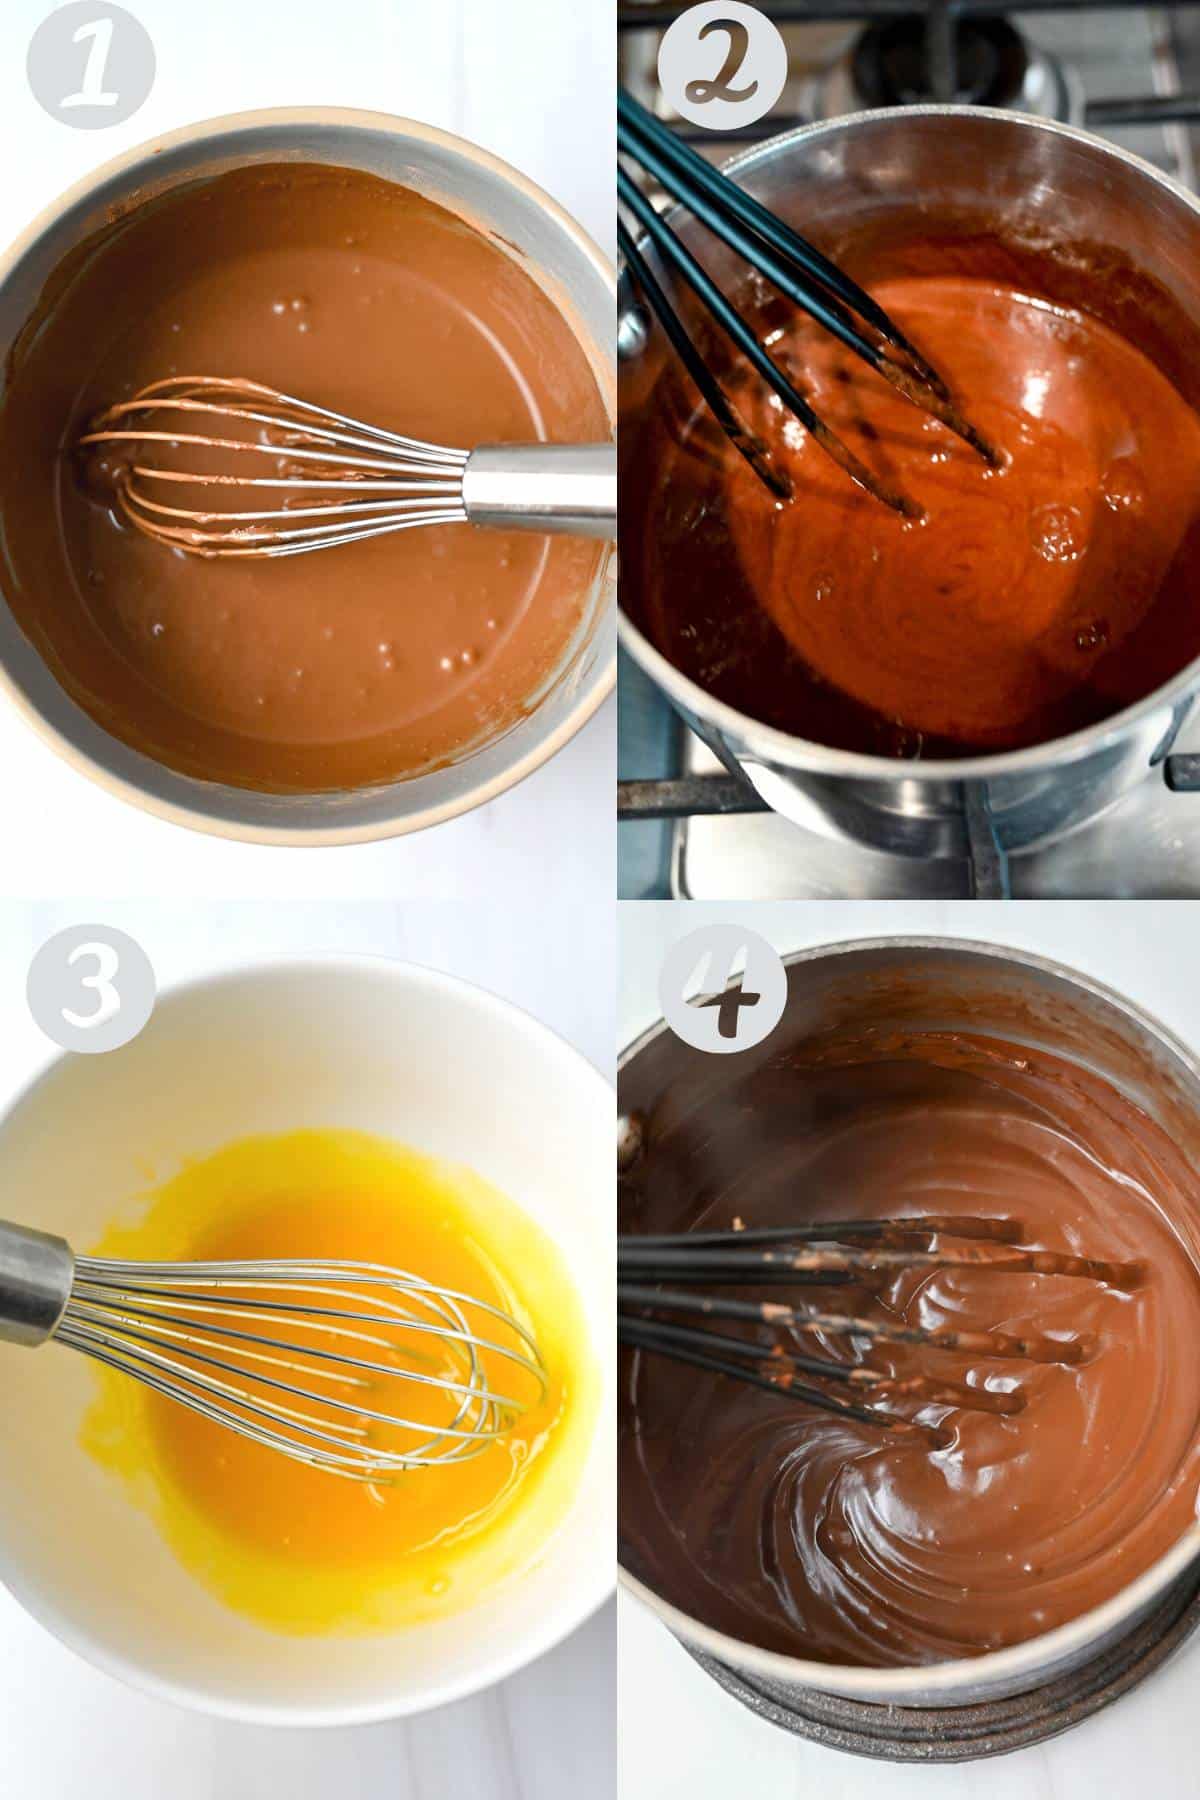 photos of the four main steps to making chocolate pudding: whisking cocoa with ingredients, cooking on the stove, whisking eggs, and adding tempered eggs to the pudding to finish